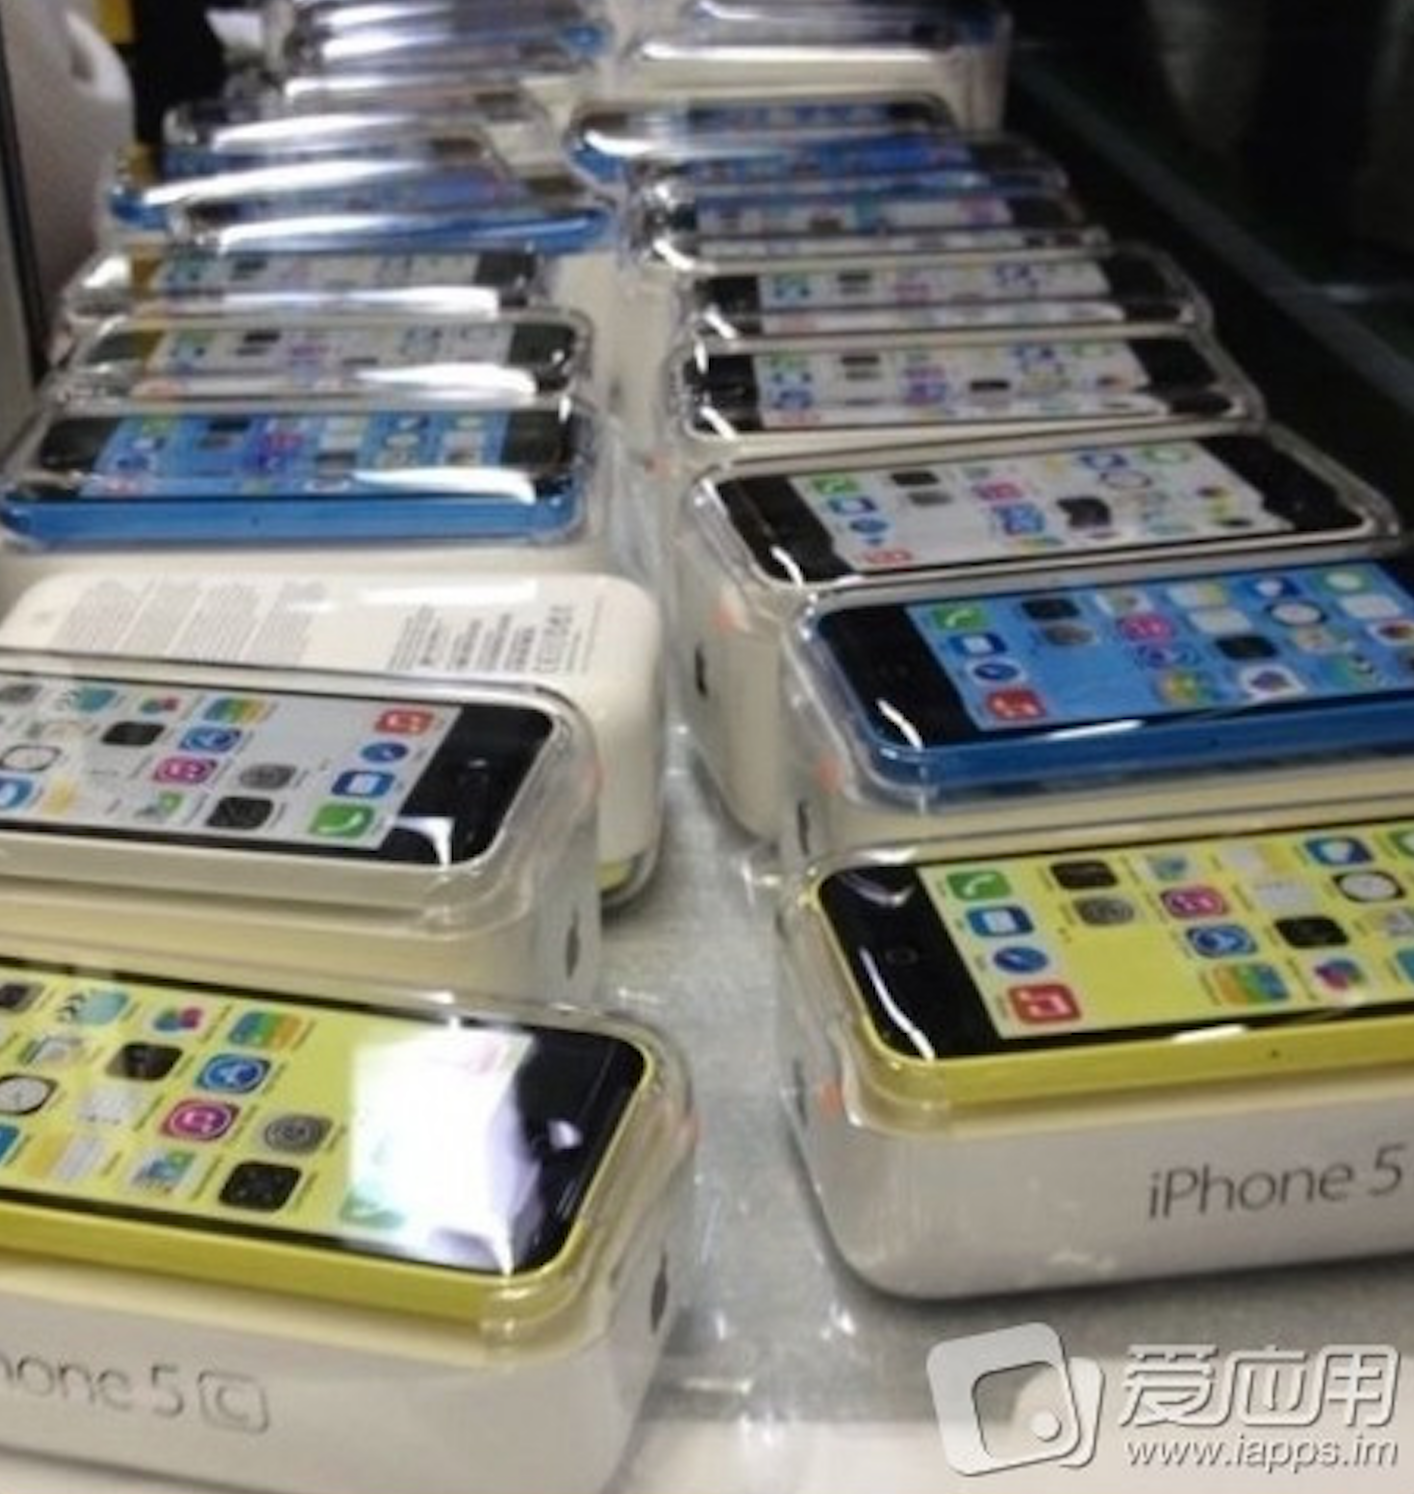 Photos Claim To Show Iphone 5c Packaging Color Matched Wallpapers 9to5mac